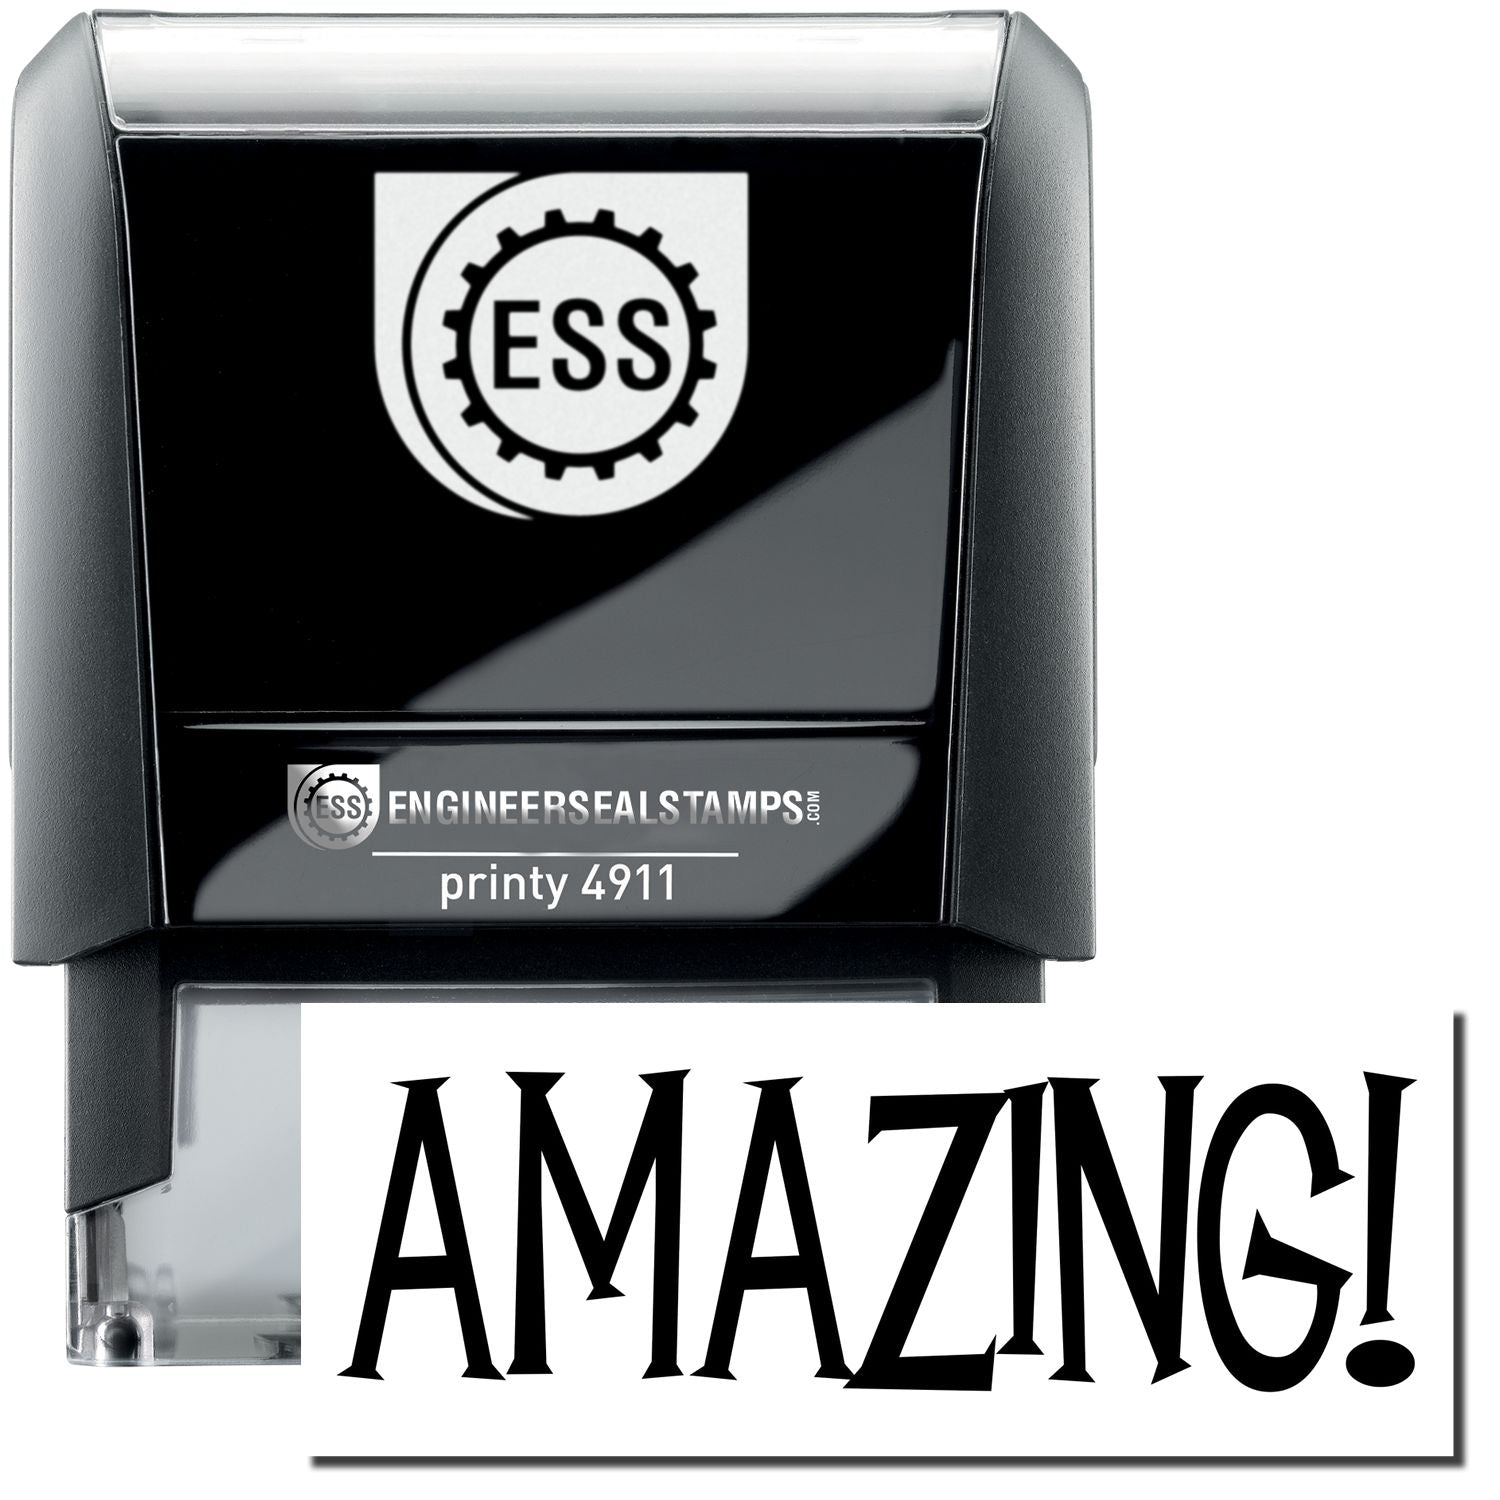 A self-inking stamp with a stamped image showing how the text "AMAZING!" is displayed after stamping.